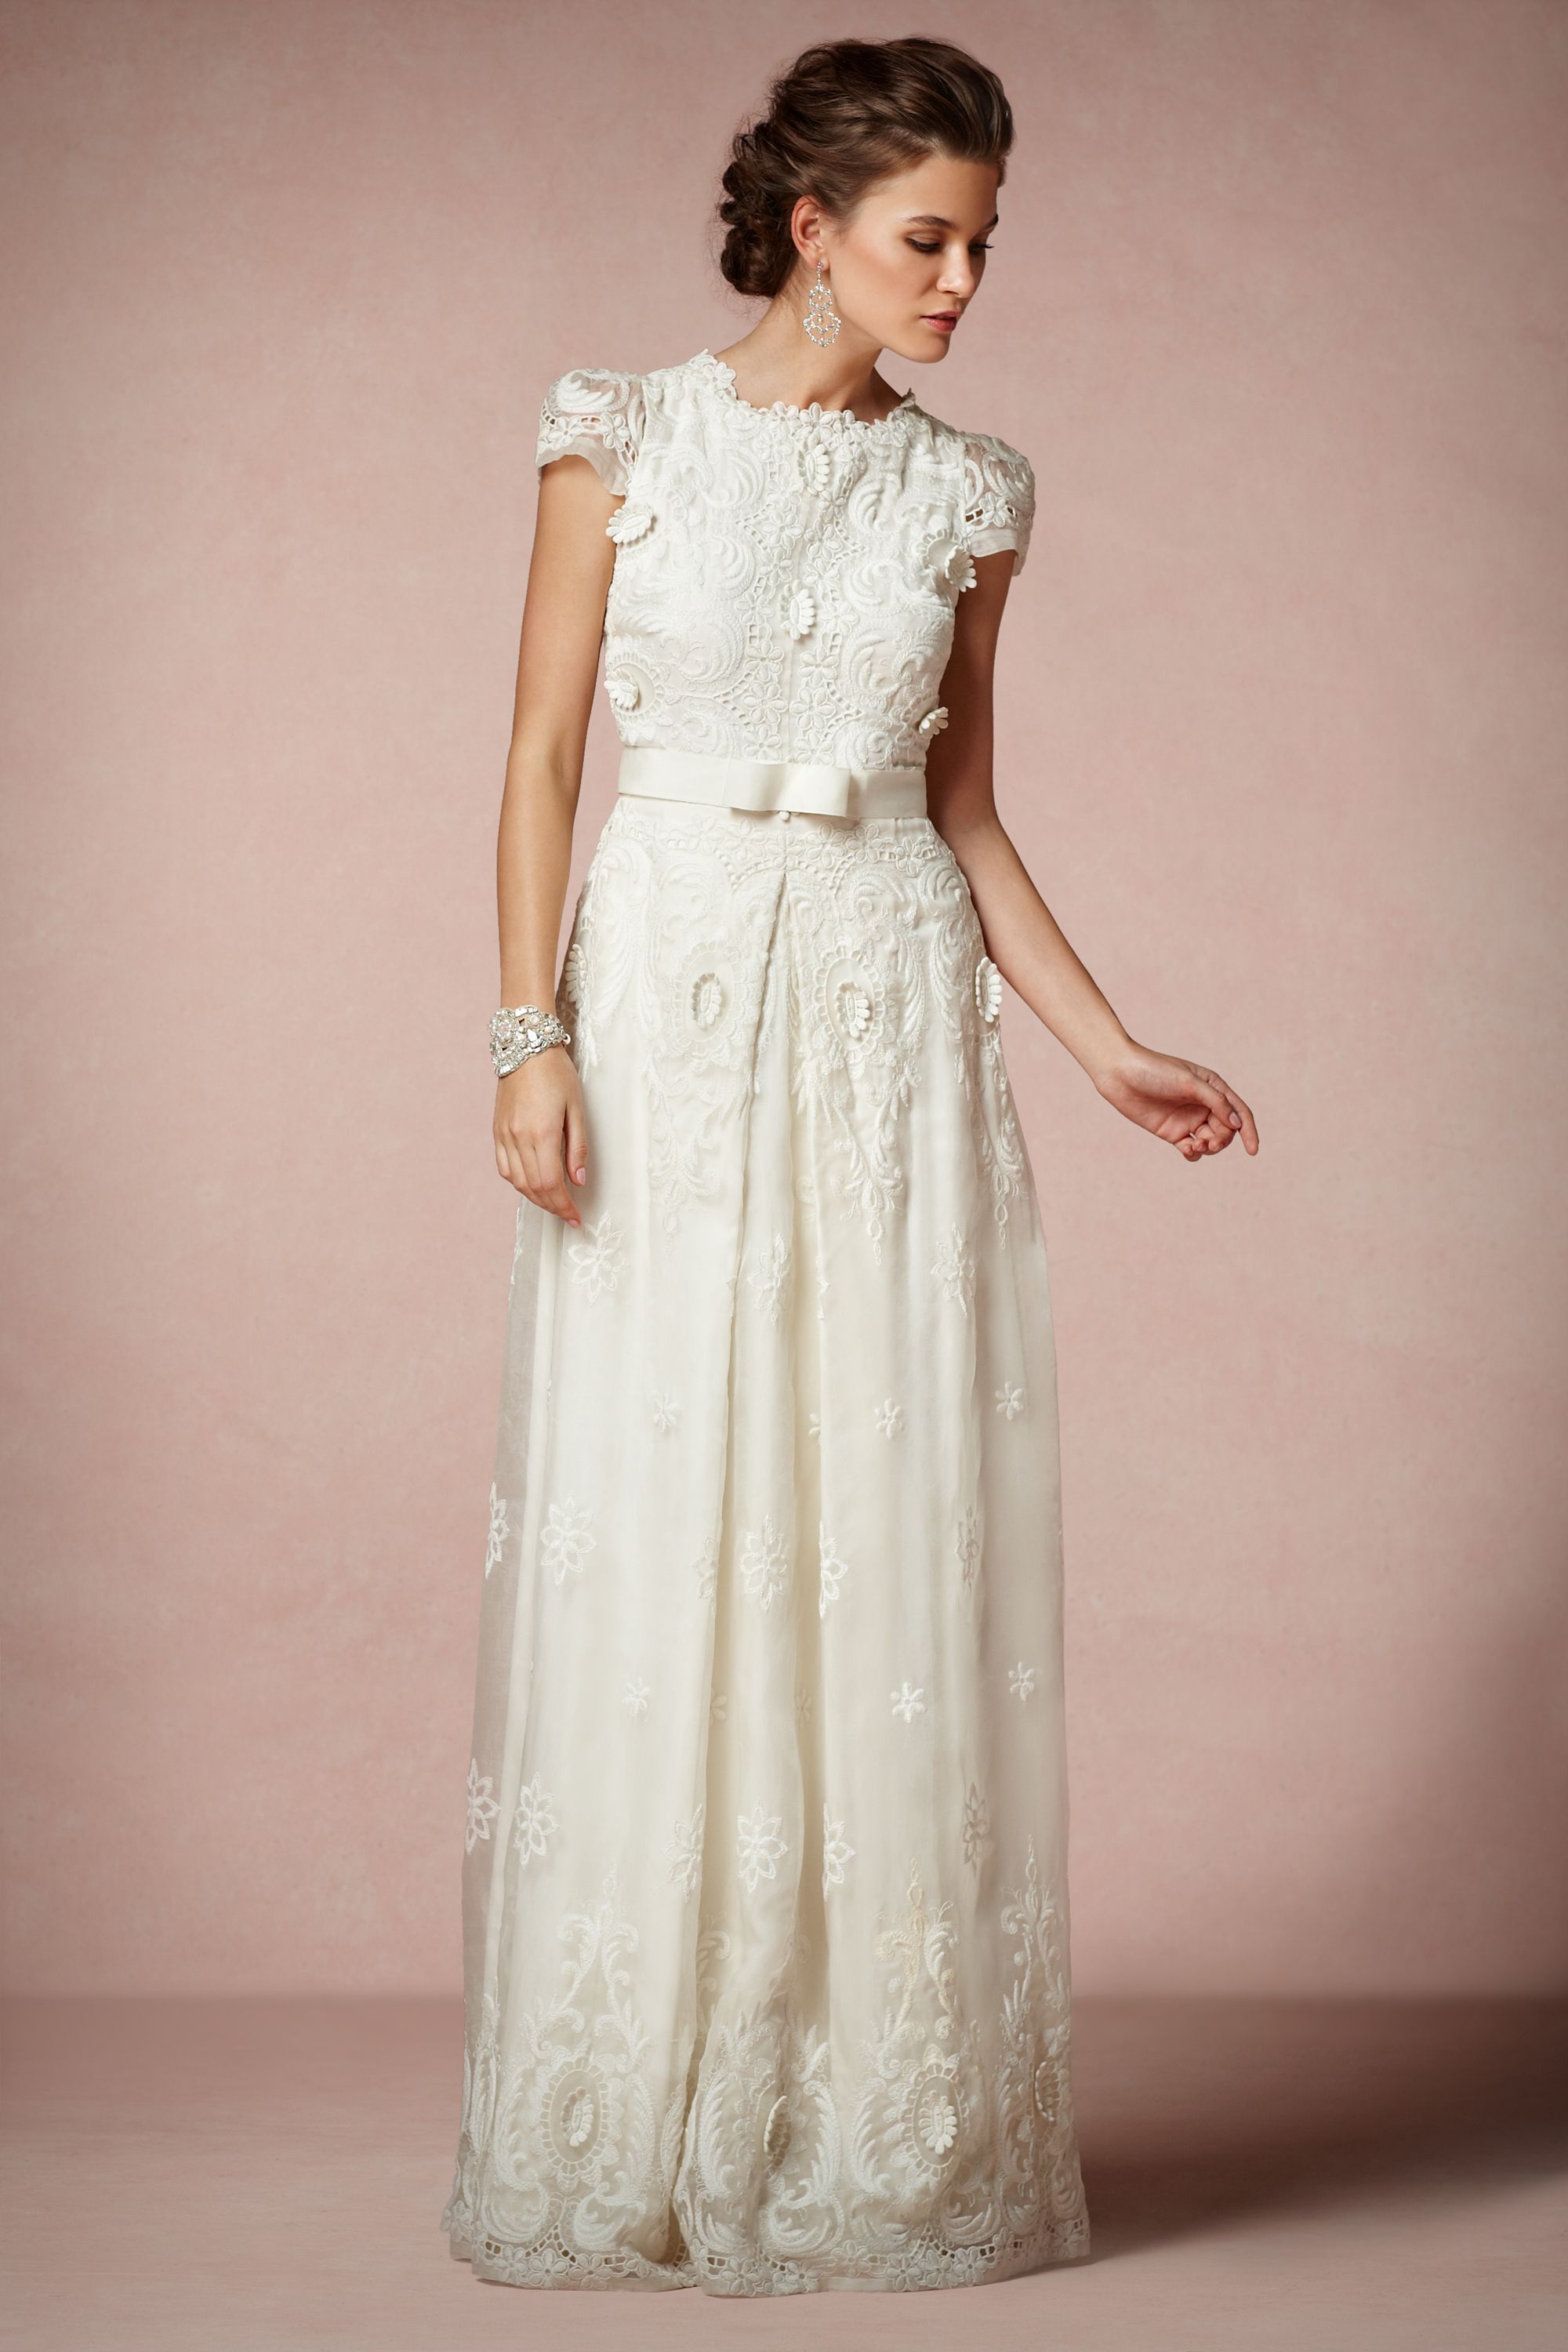 Rococo Gown in Sale | BHLDN